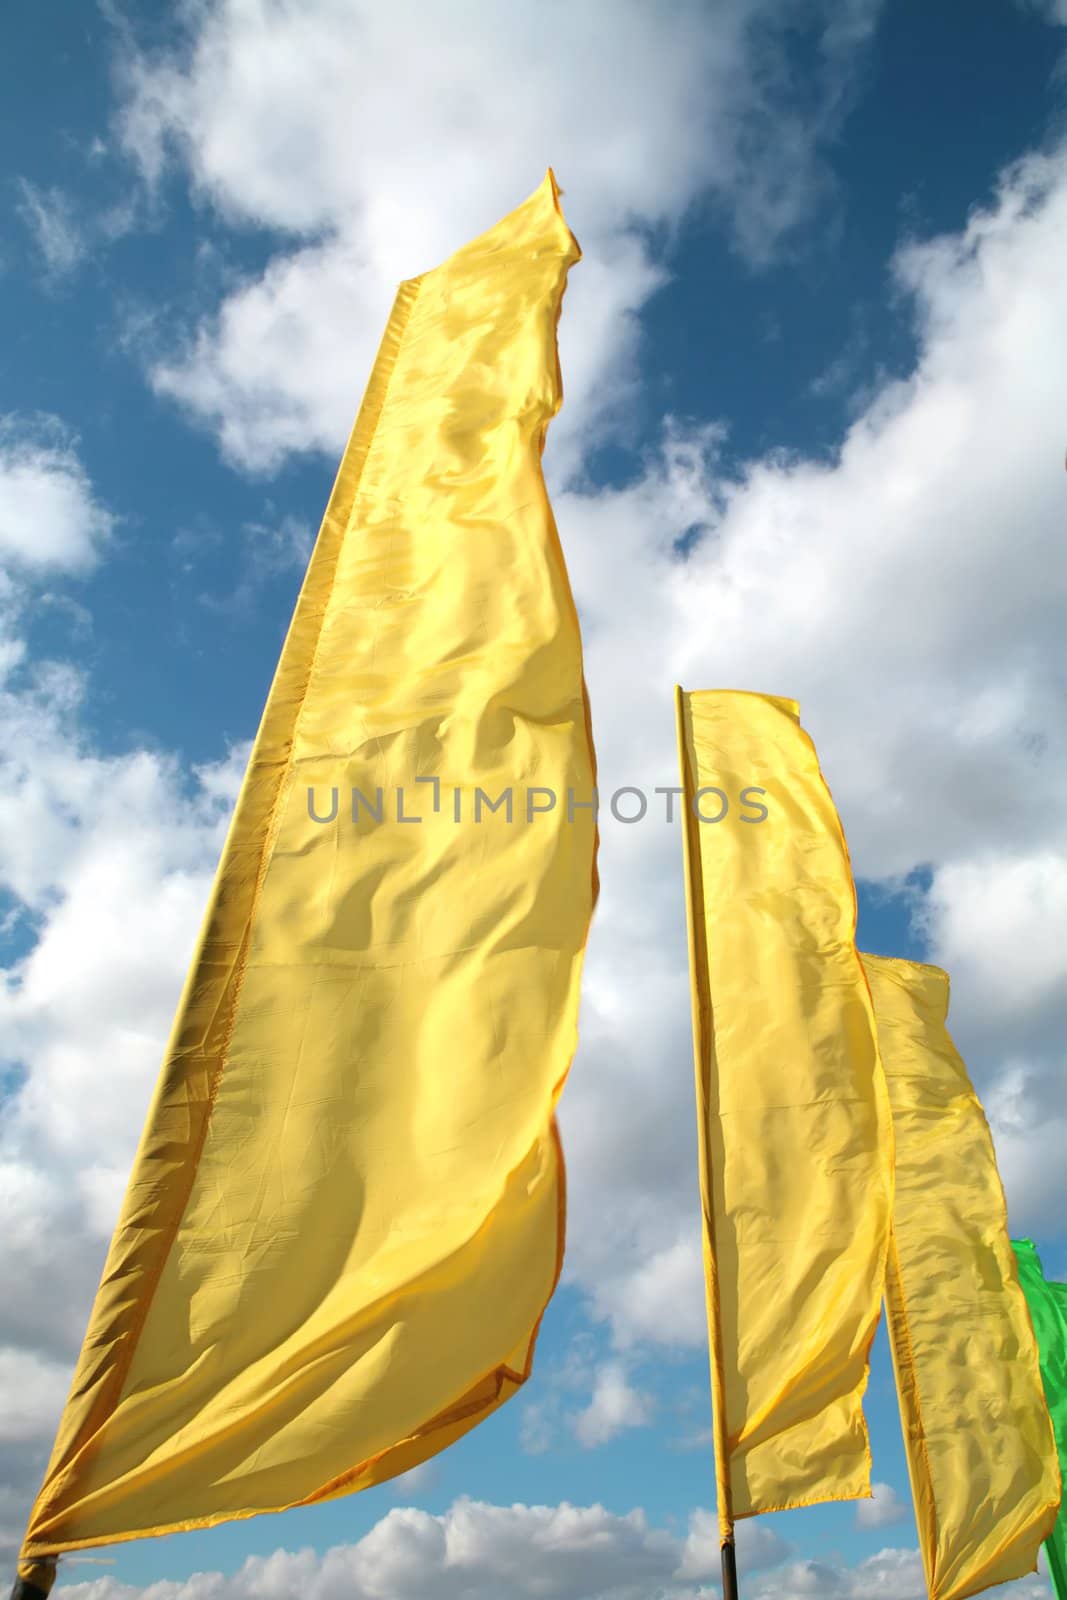 brightly yellow flags on winds, spring cool sky